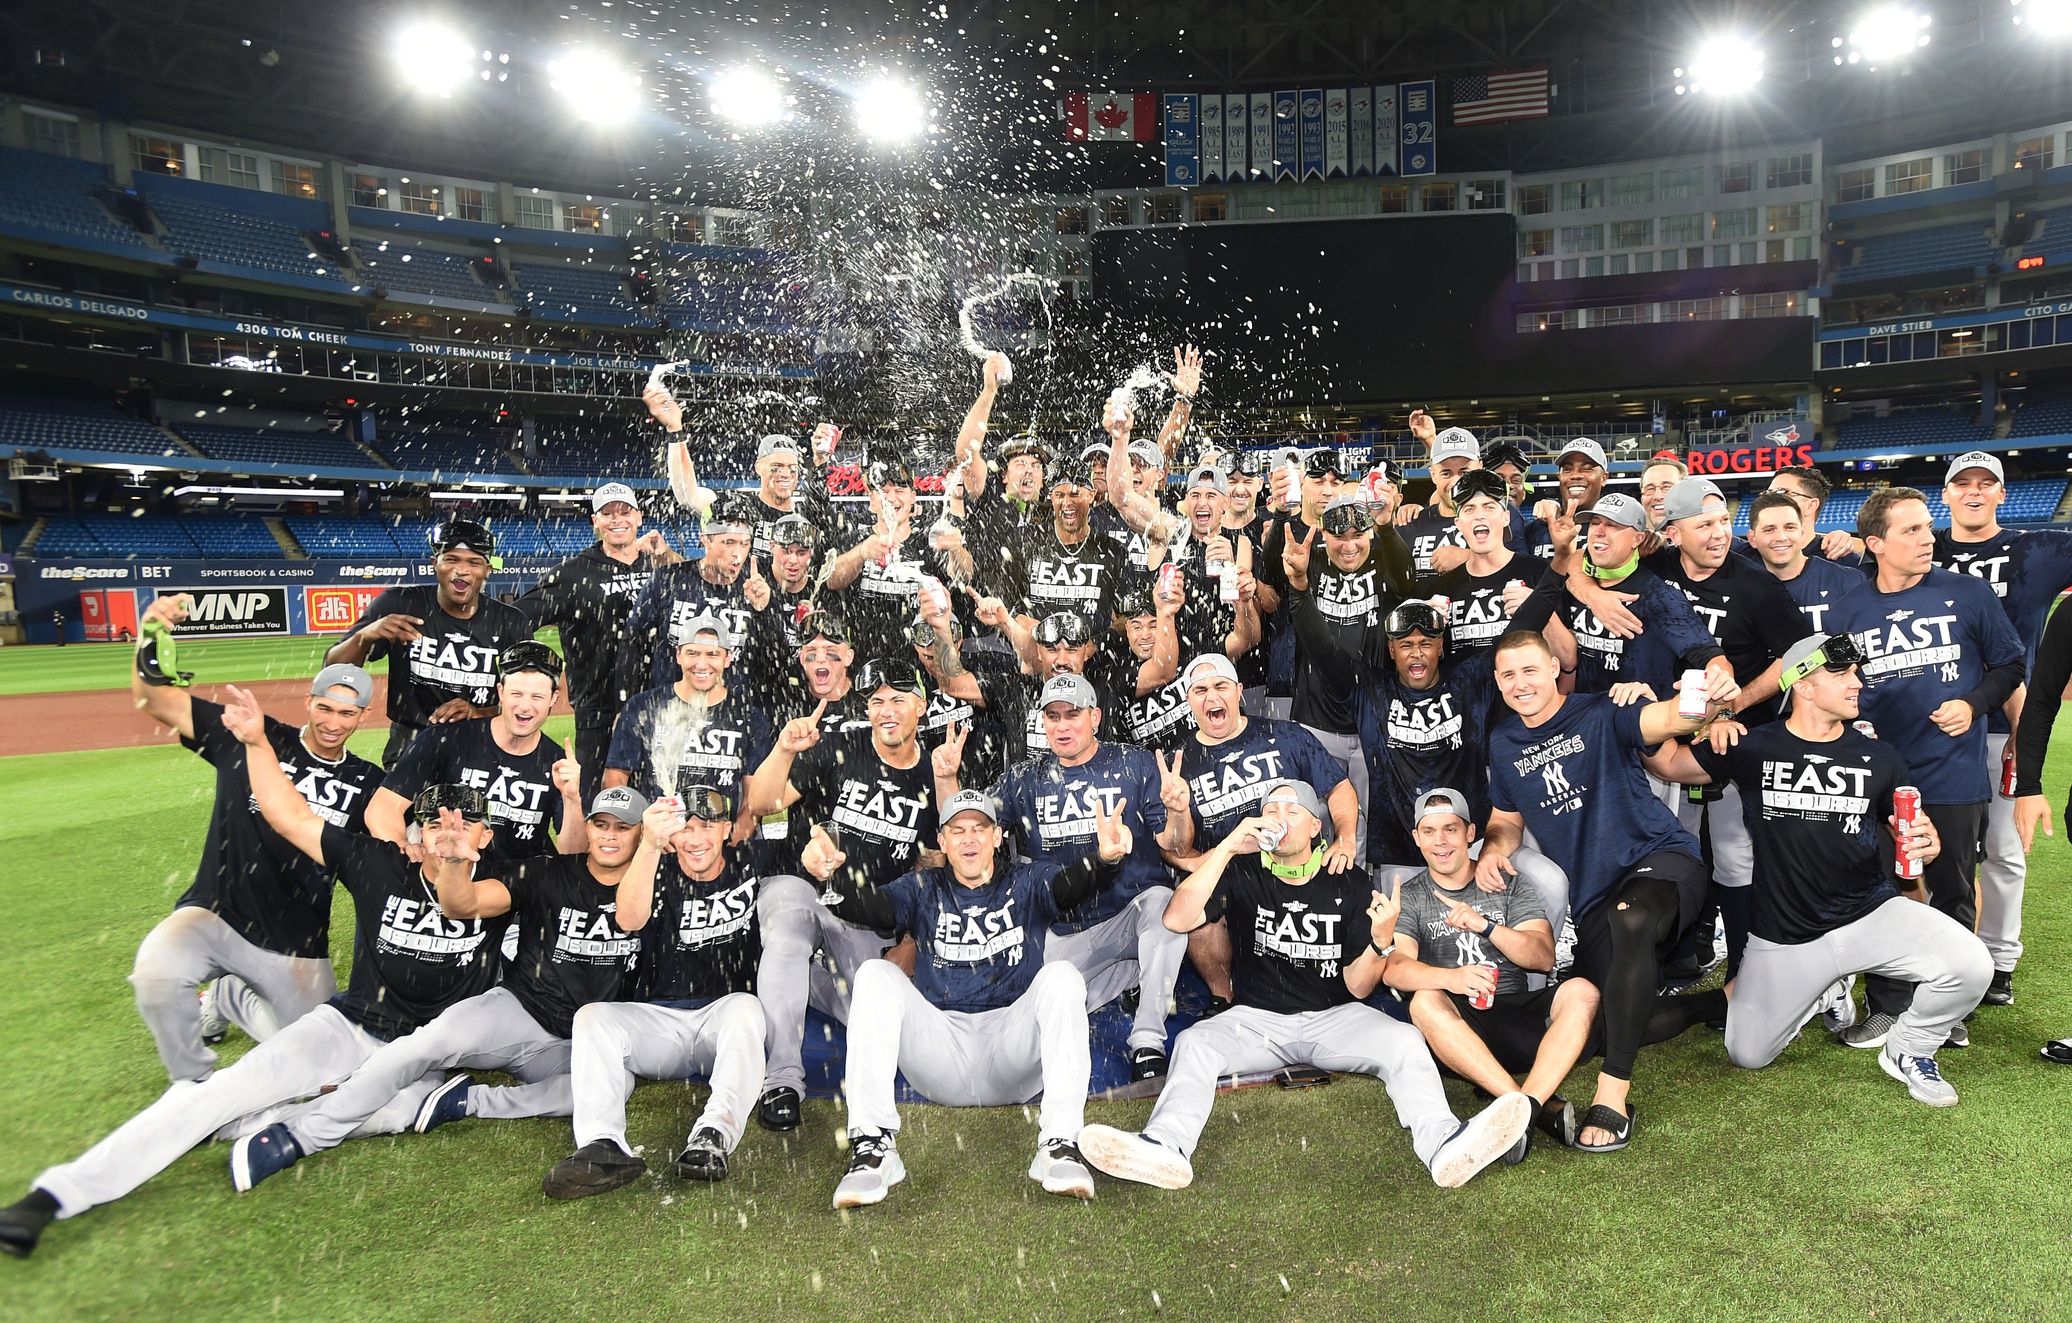 Yankees Celebrate Division Title, Reflecting on Journey That 'Made Us